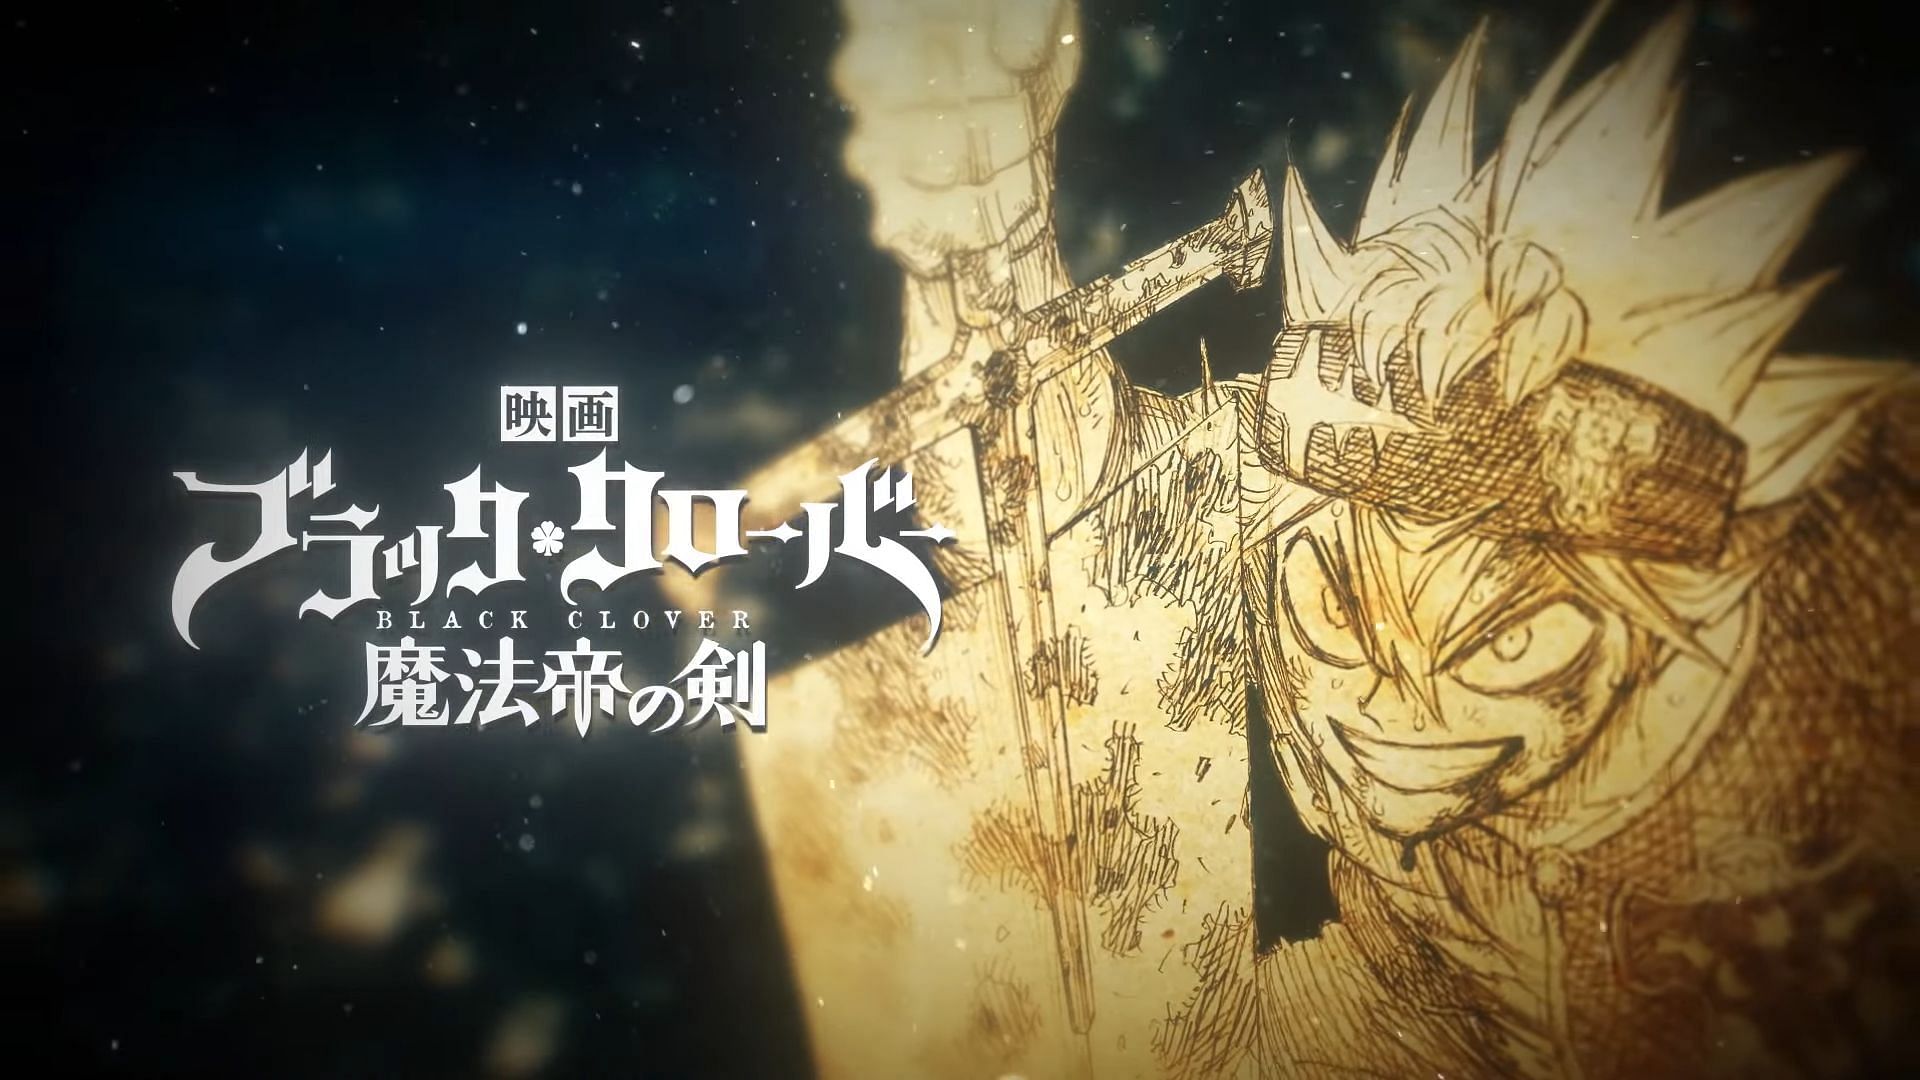 Black Clover Season 5: What to expect?